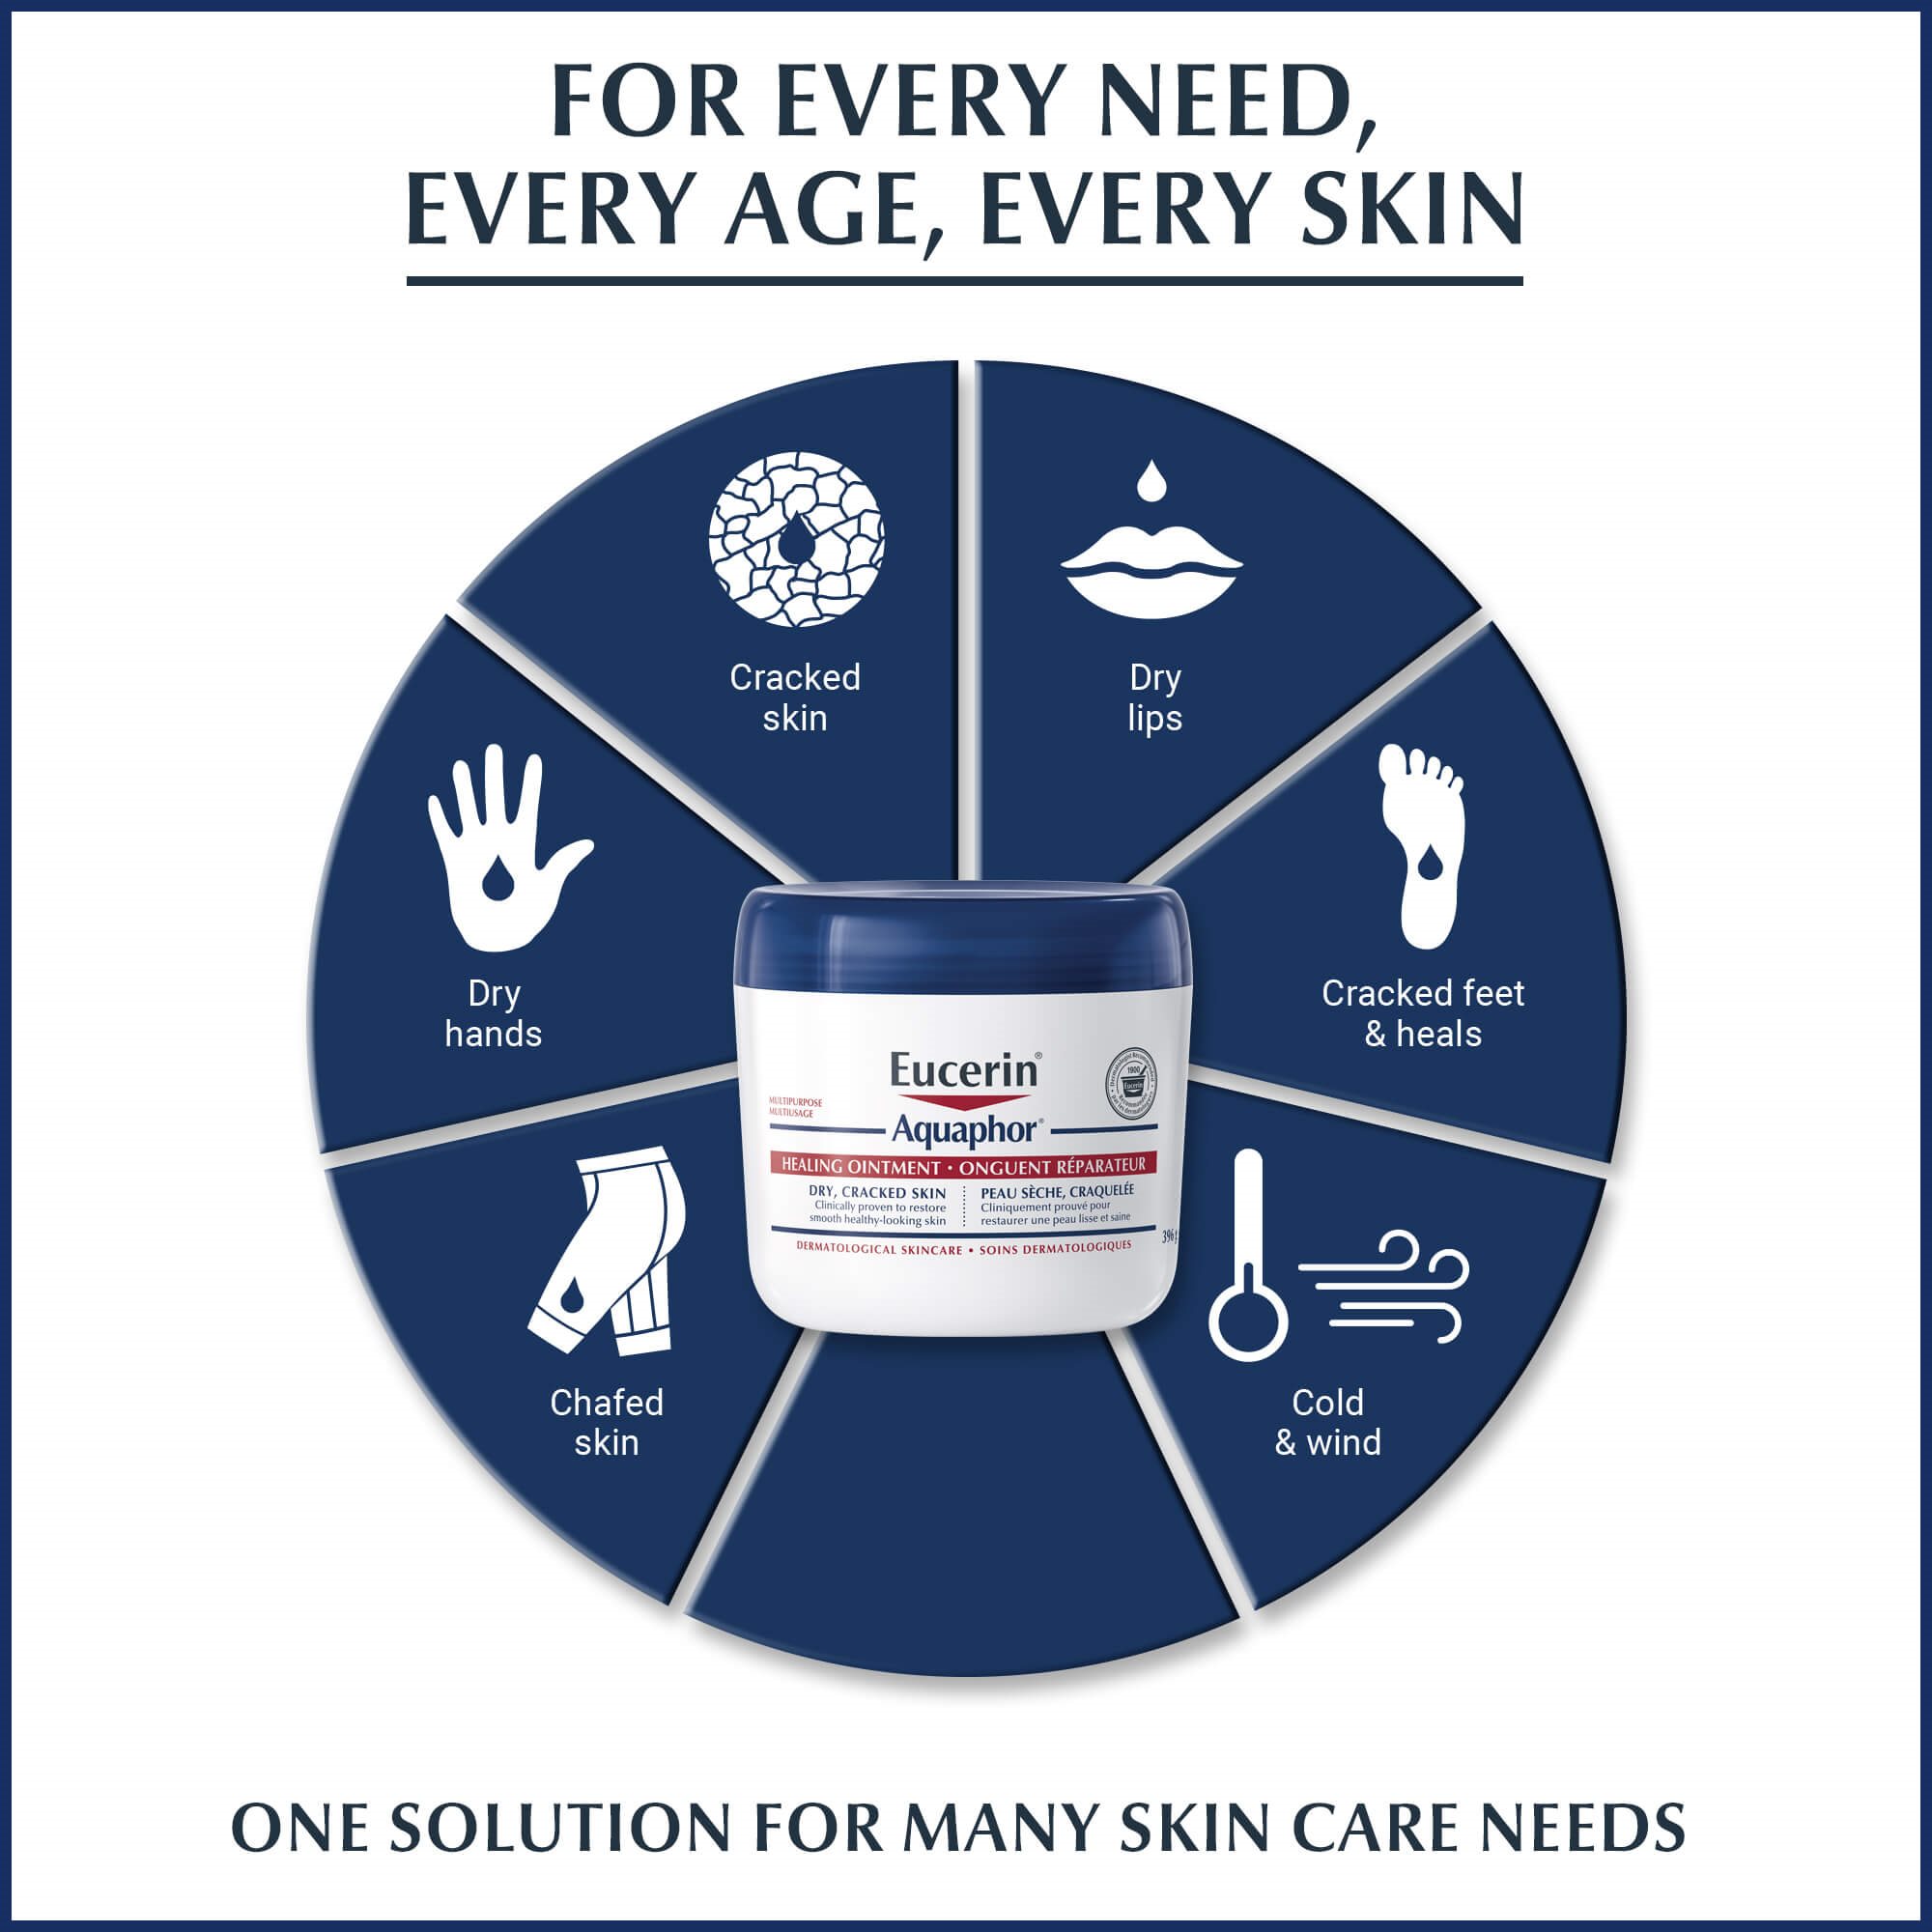 Eucerin Aquaphor healing ointment tube against a wheel showing product uses, such as cracked skin, dry lips, cracked feet and heels, chafed skin, etc